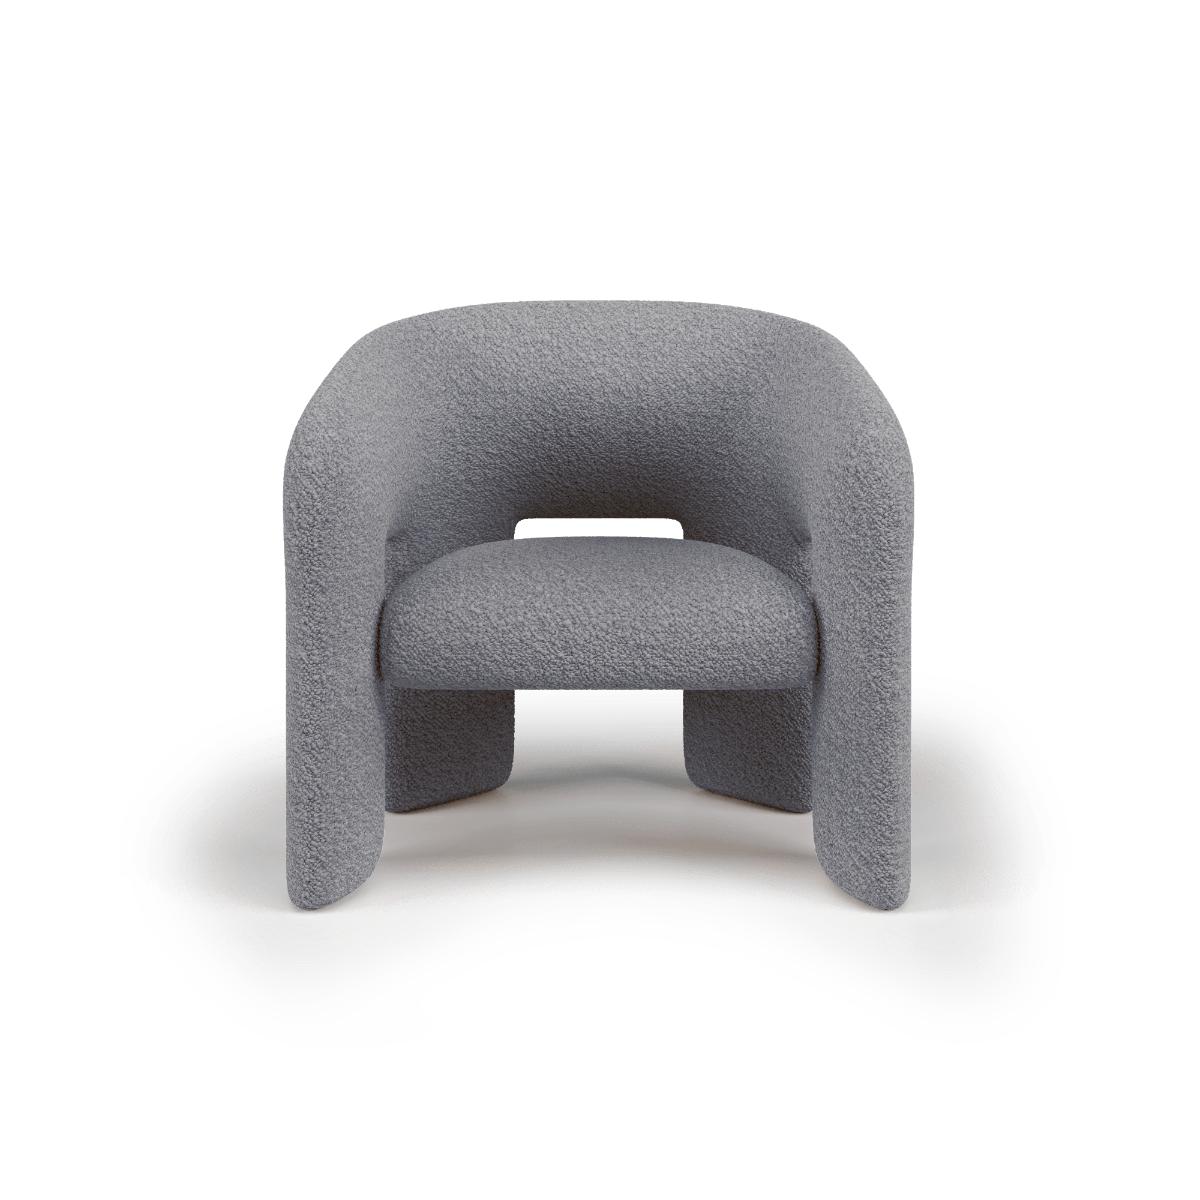 Bold Armchair by Mohdern
Dimensions: W 78 x D 65 x H 73 cm
Materials: Fabric, Bouclé


Bold is a comfortable armchair that features enveloping lines and different geometric shapes skilfully assembled through the encounter between know-how and a